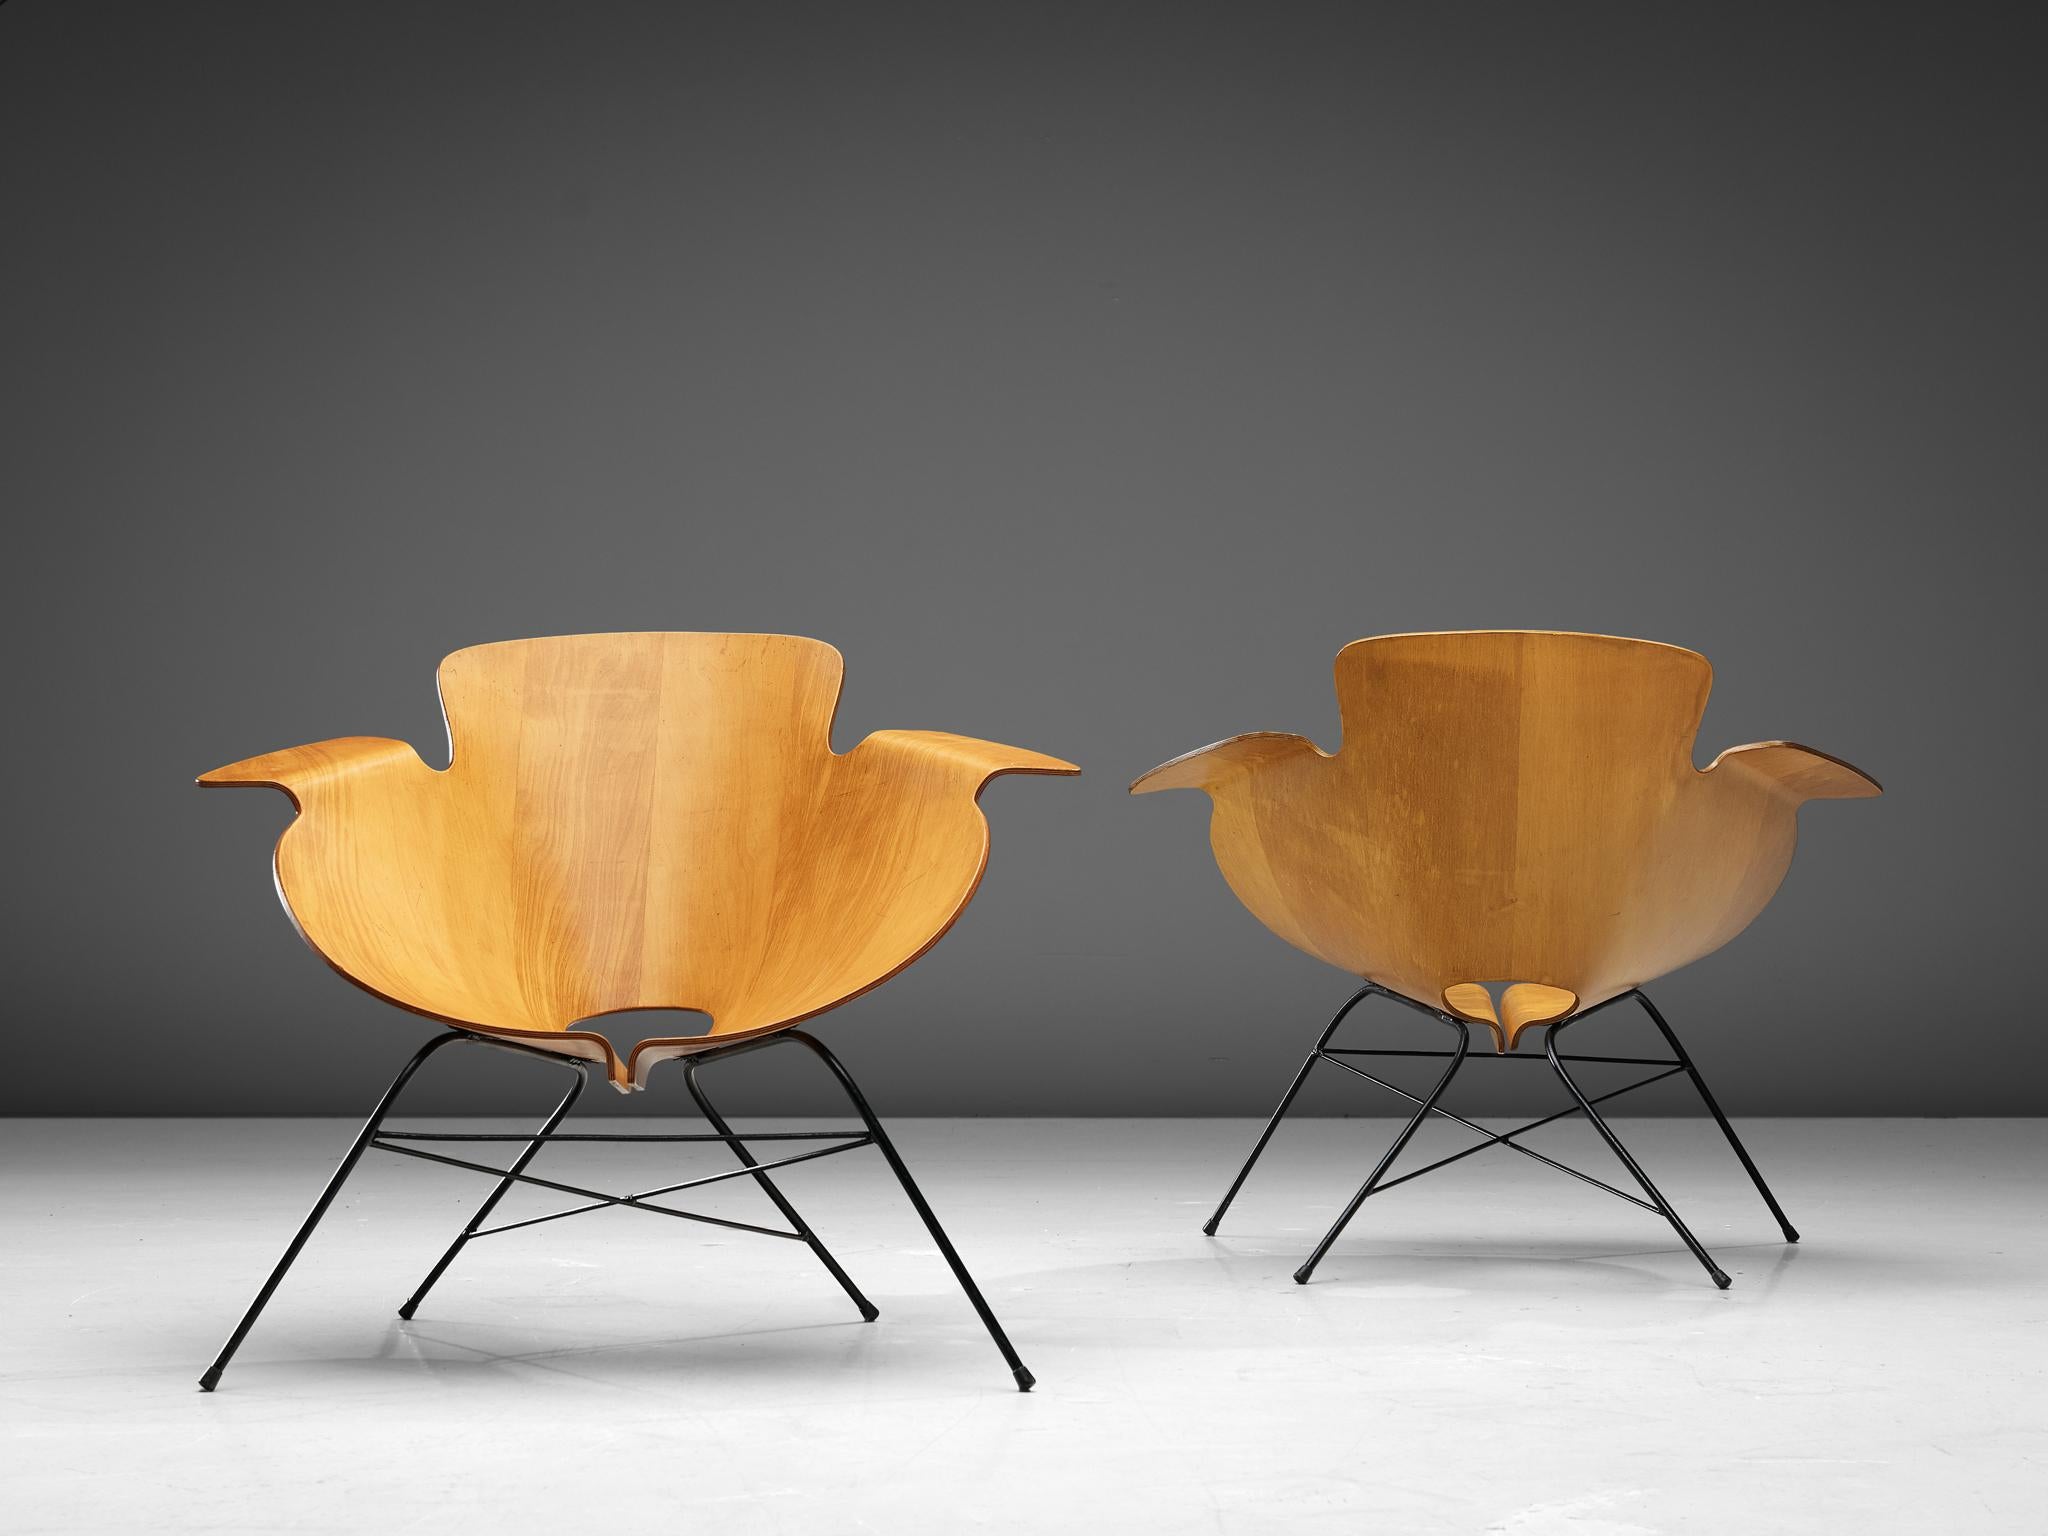 Pair of lounge chairs, attributed to Vittorio Nobili, walnut, plywood and metal, Italy, 1960s

A pair of easy chairs in plywood and black coated metal. The seats are veneered in walnut and the grain gives these chairs even more character. The shell